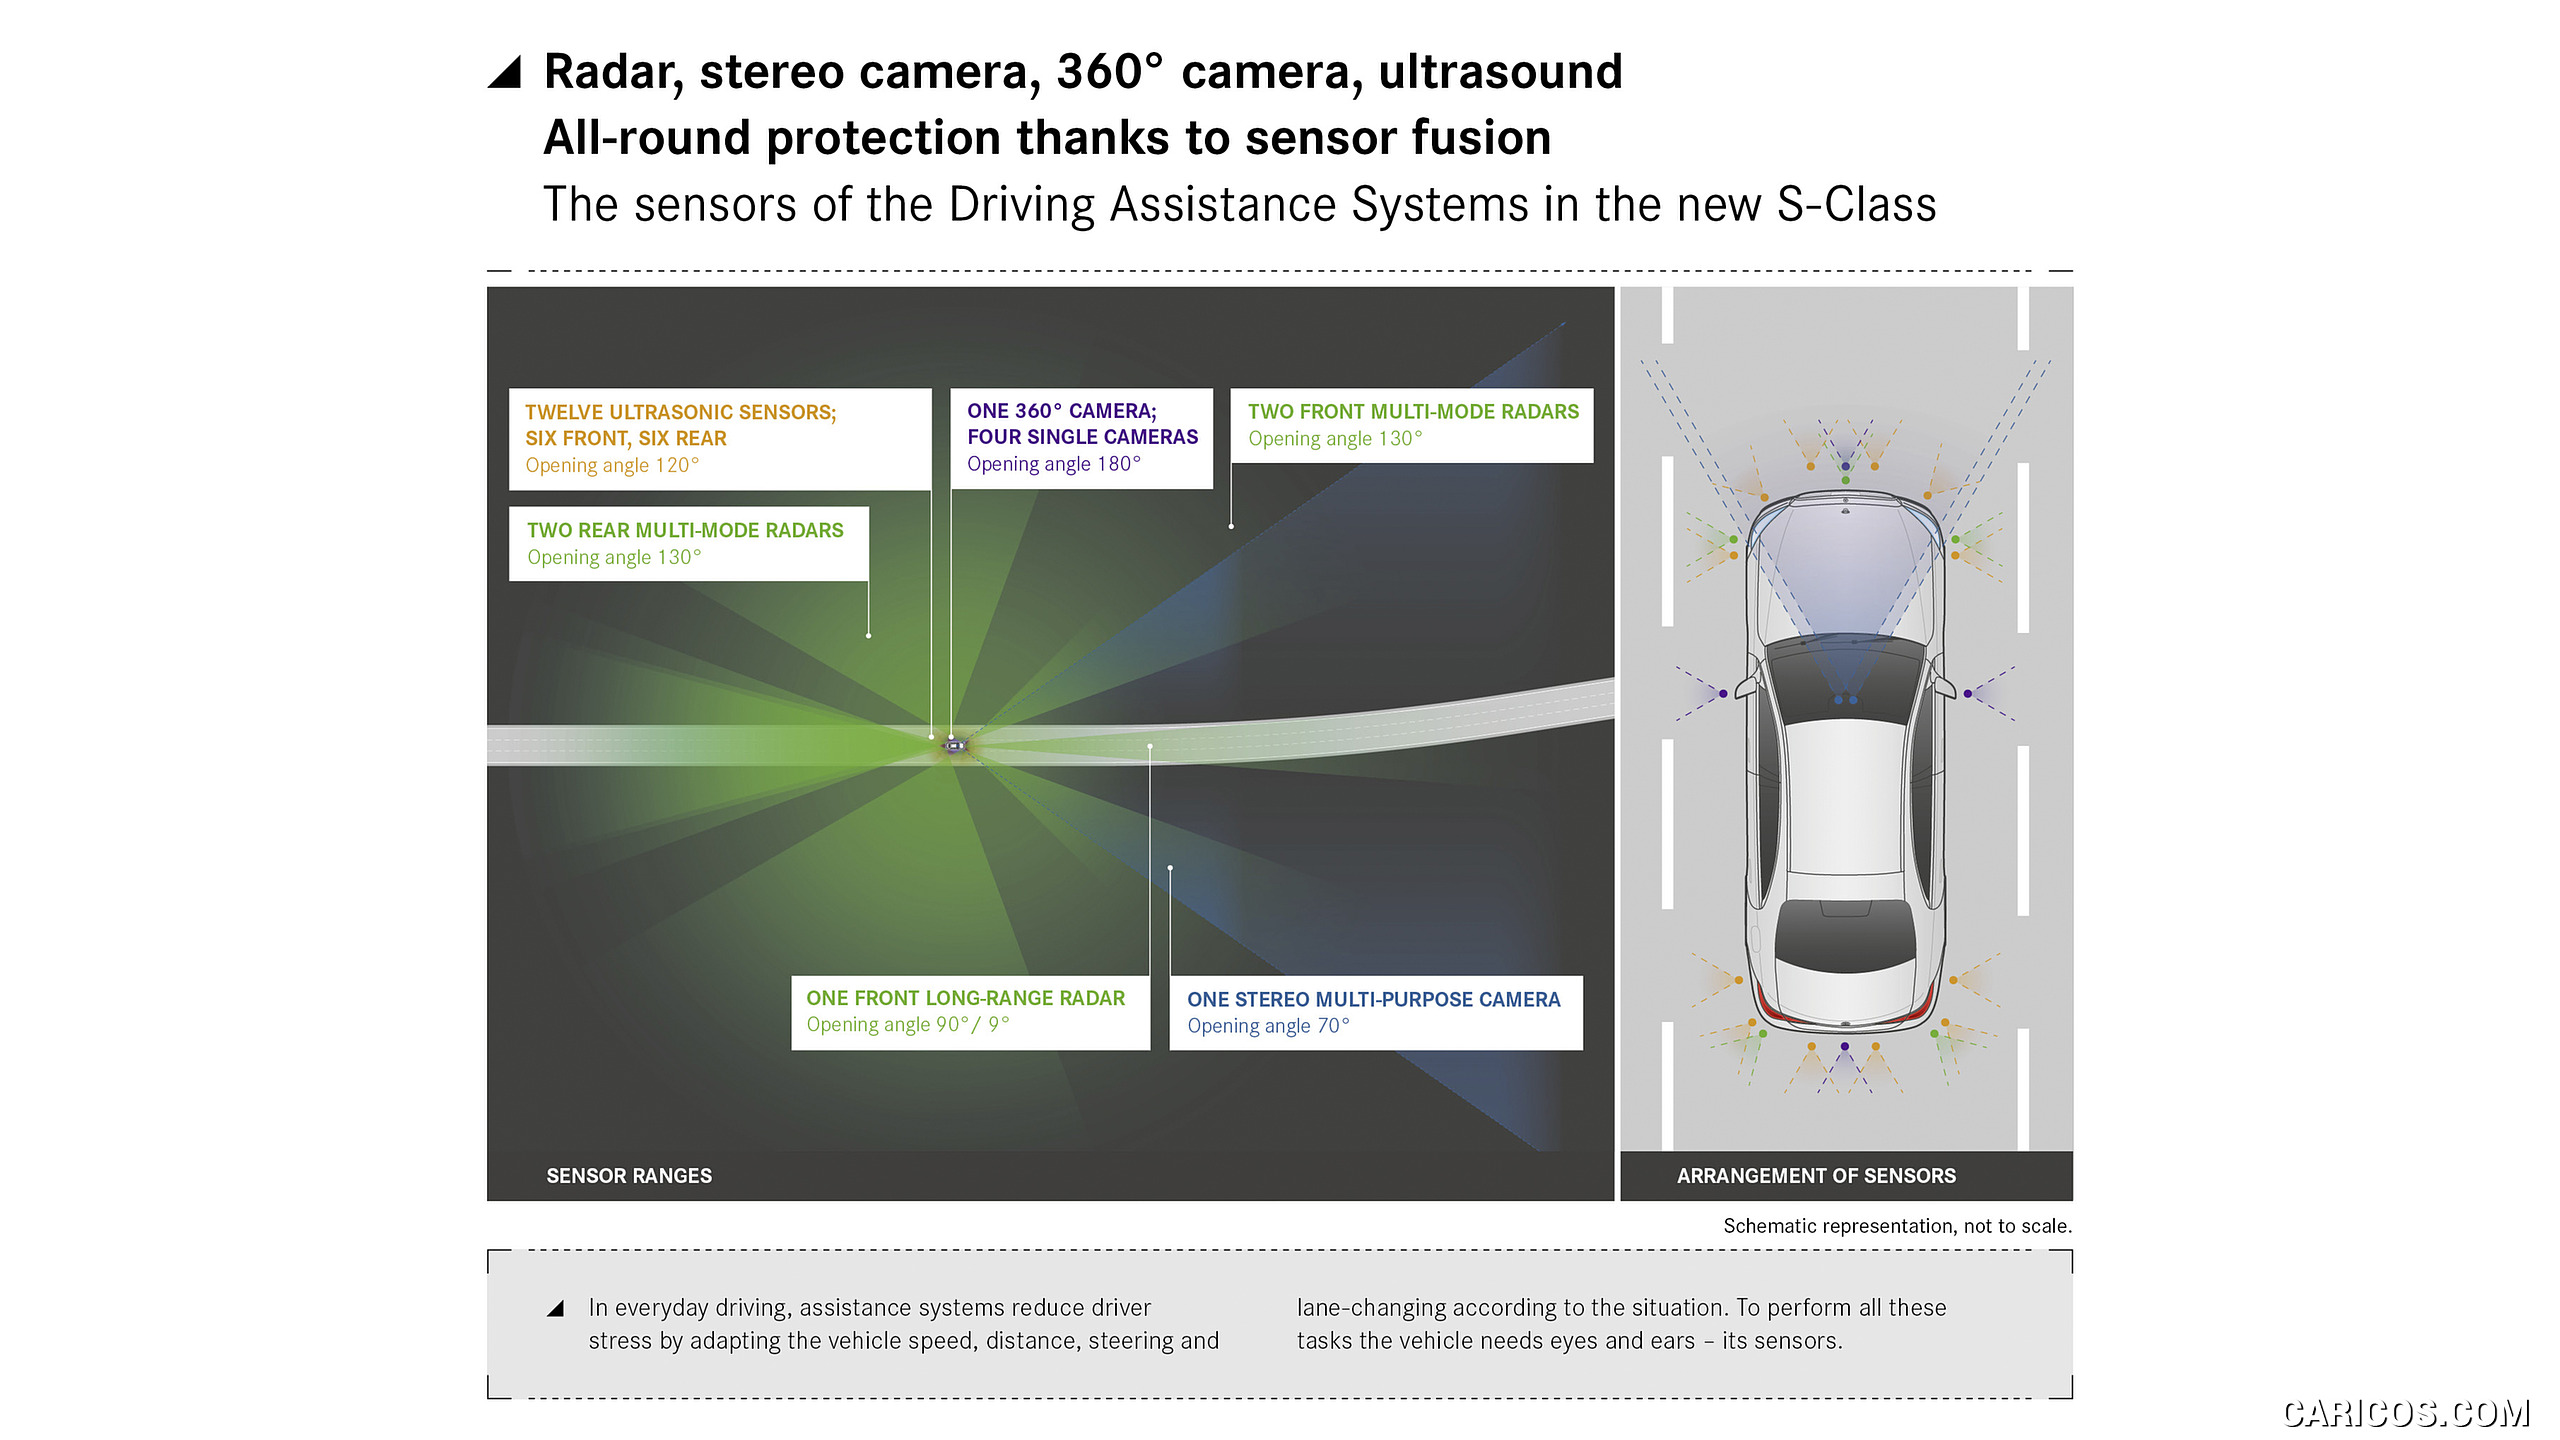 2021 Mercedes-Benz S-Class - The sensors of the driver assistance systems, #195 of 316